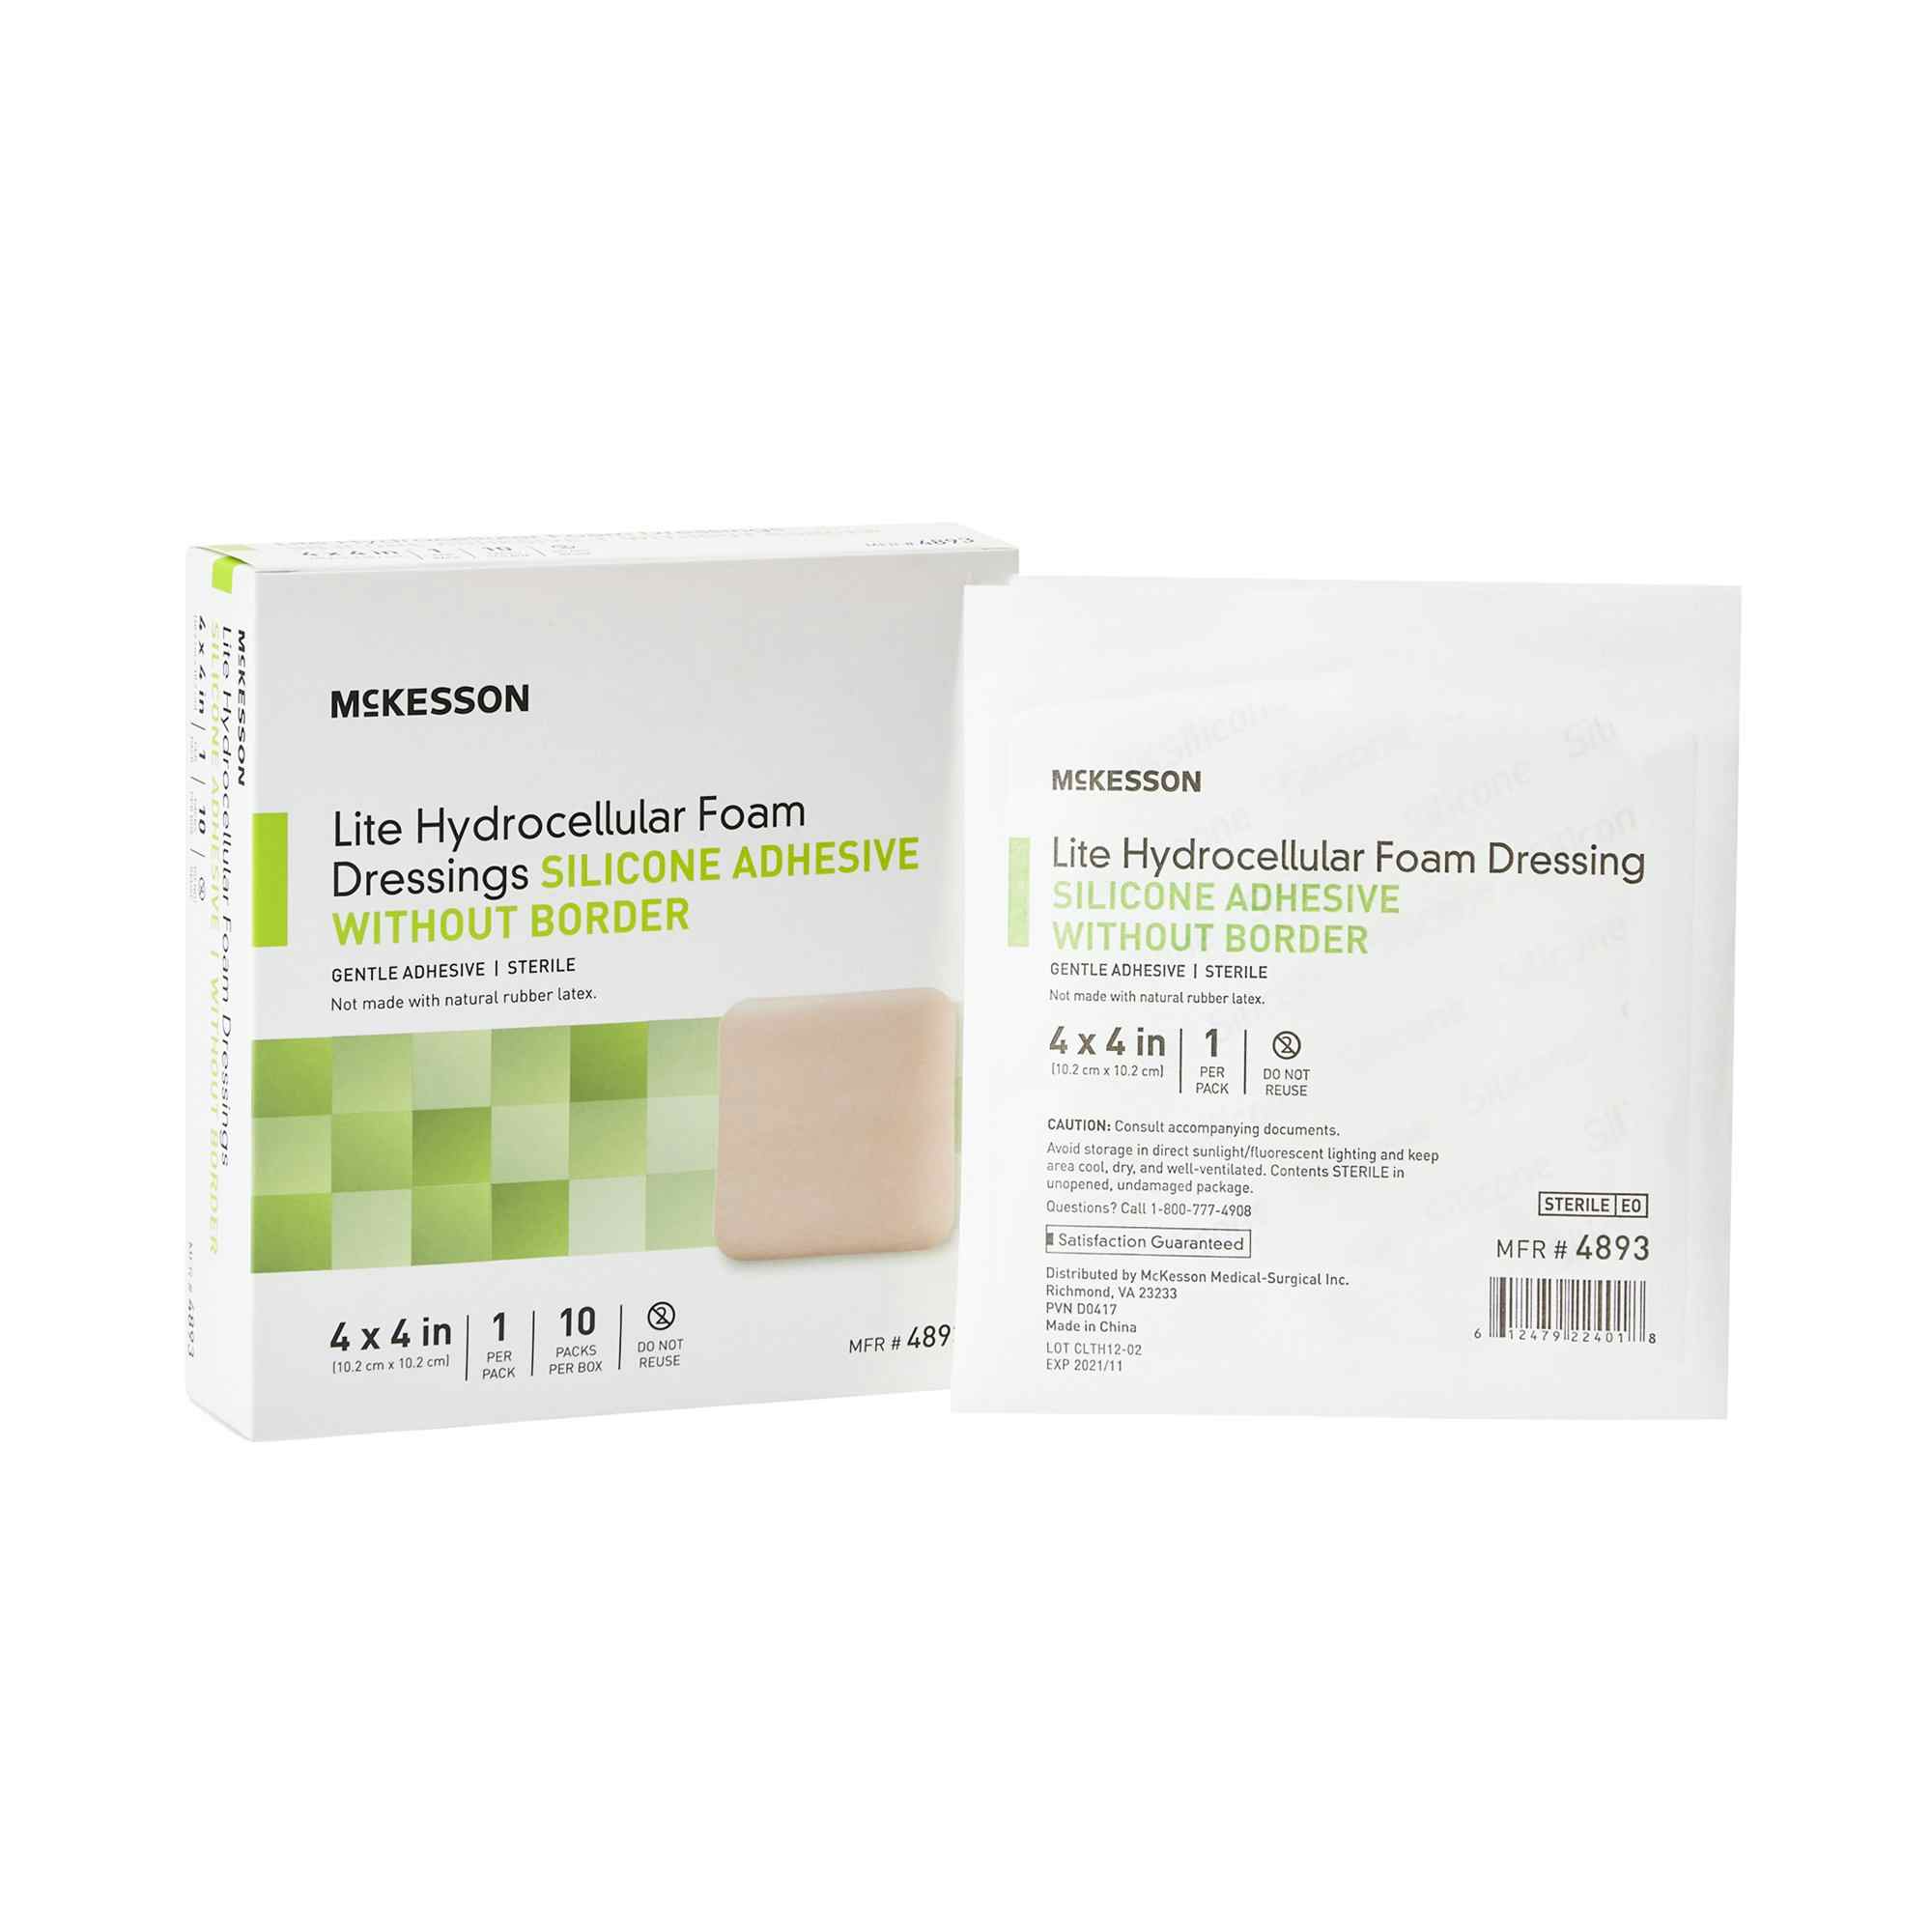 McKesson Lite Hydrocellular Foam Dressings Silicone Adhesive without Border, 4 X 4"